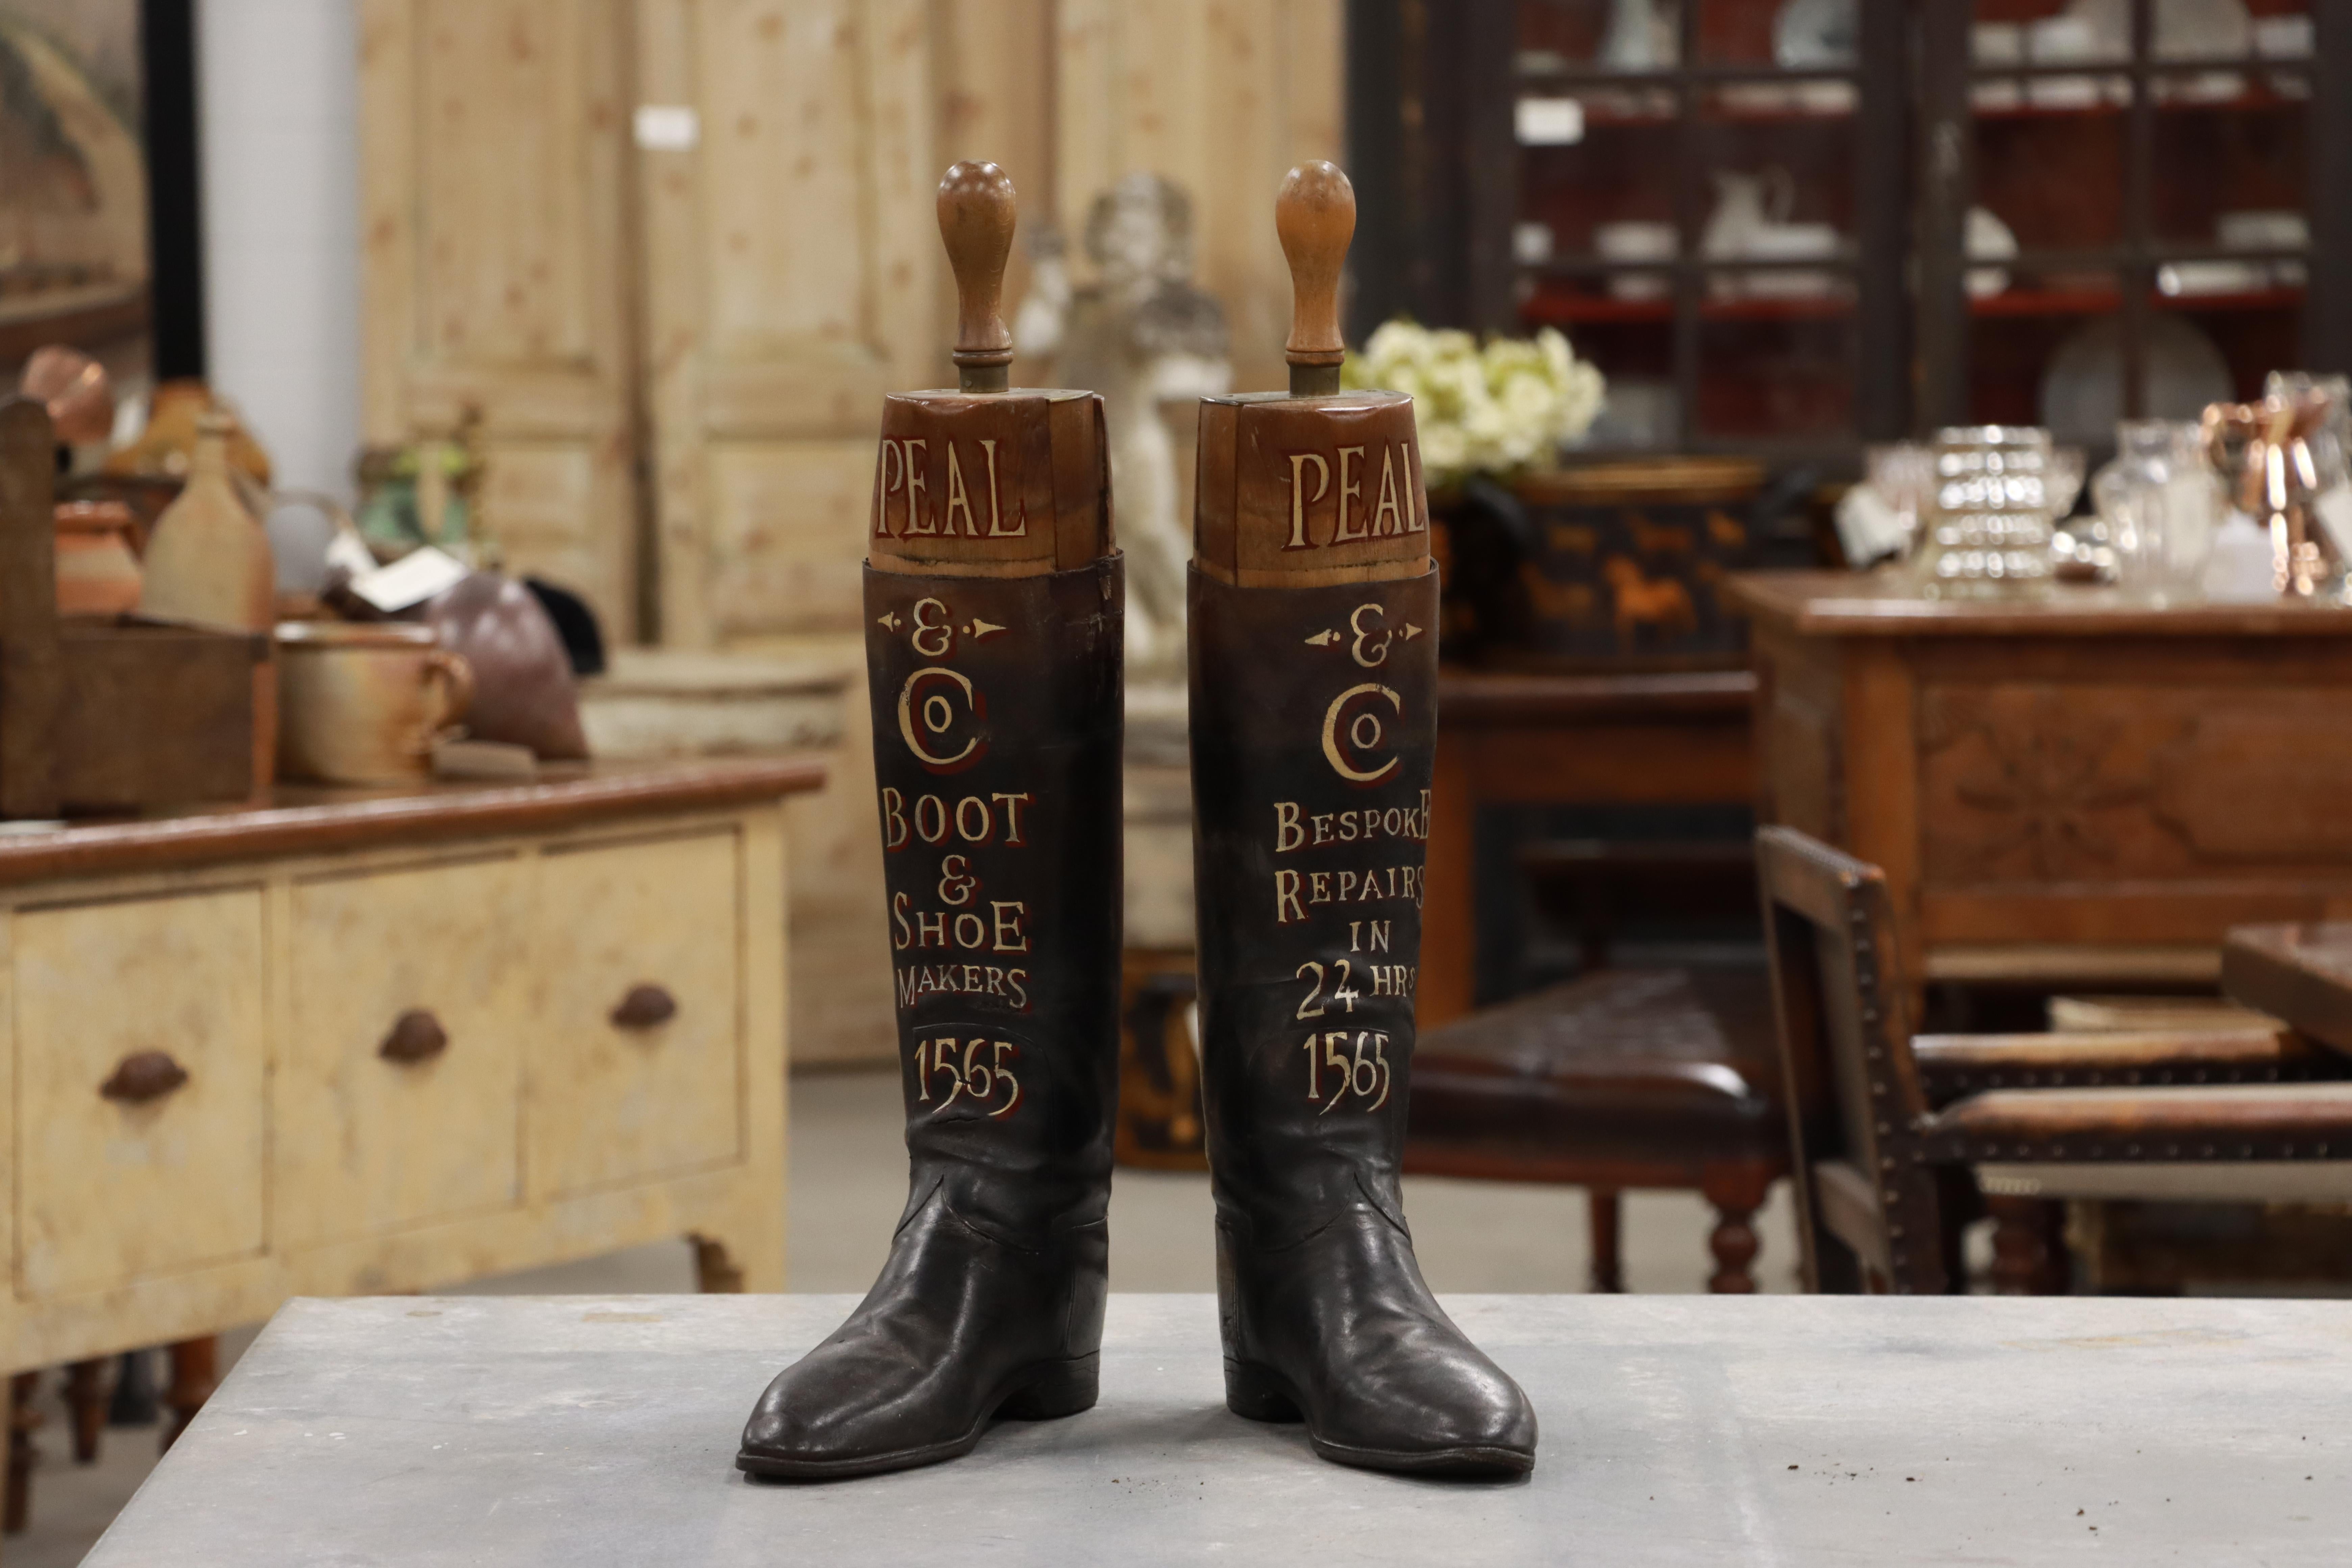 Pair of antique English leather riding boots with their original hardwood trees. Both boots are decorated with gold lettering, advertising Peal & Co. (later applied) 

Peal manufactured shoes and boots in London from 1565 to 1965 in